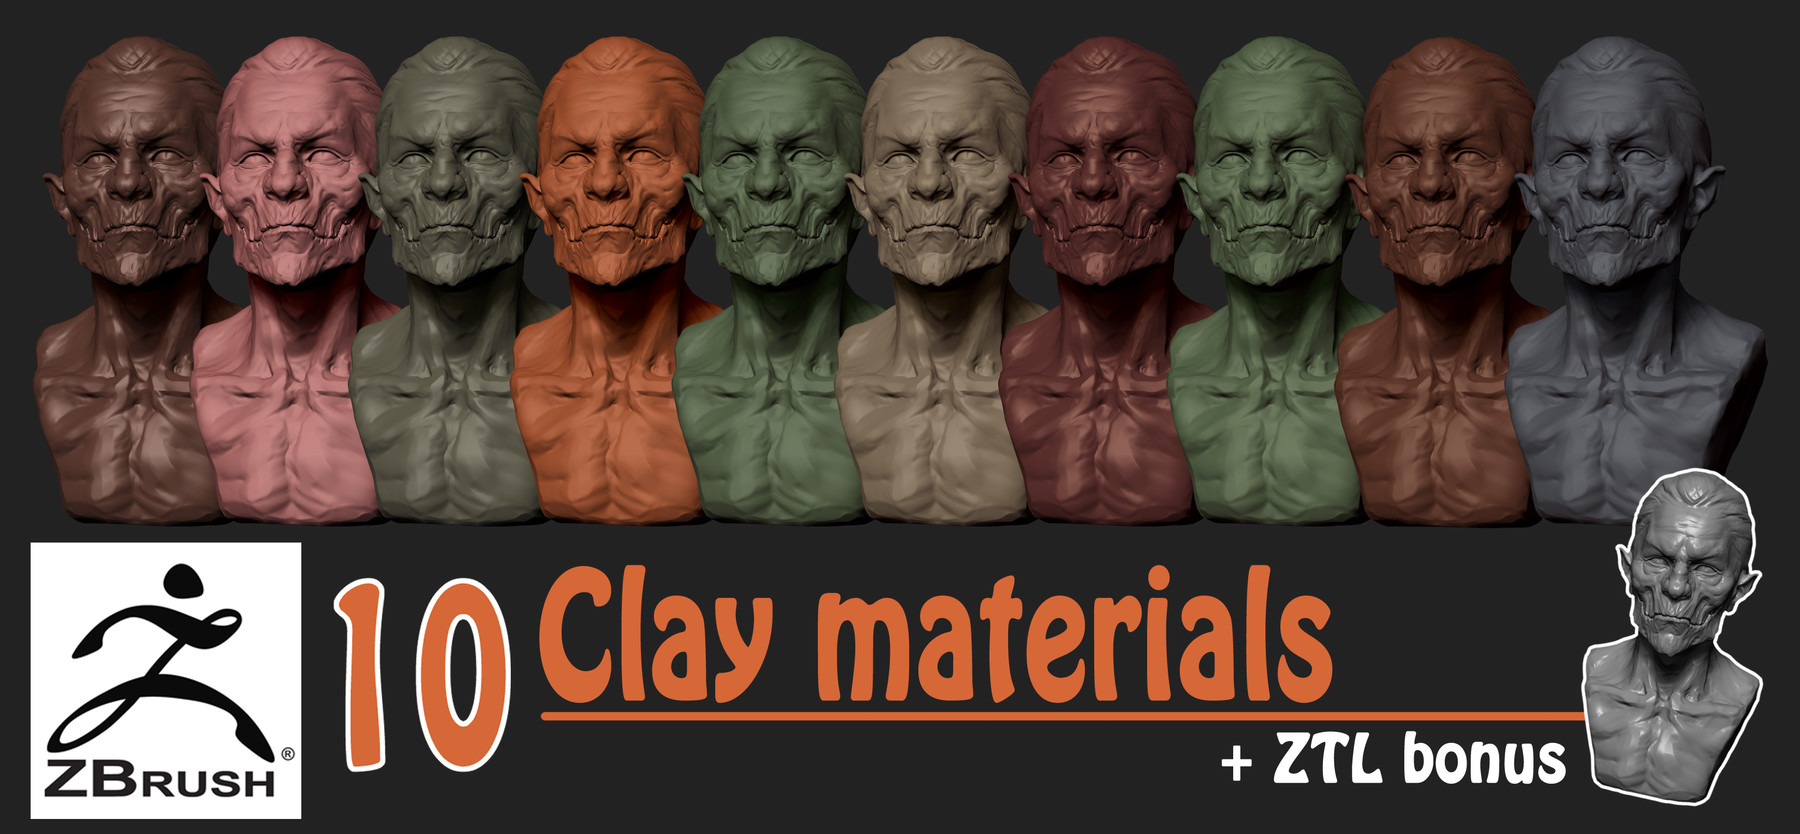 preserve material id zbrush